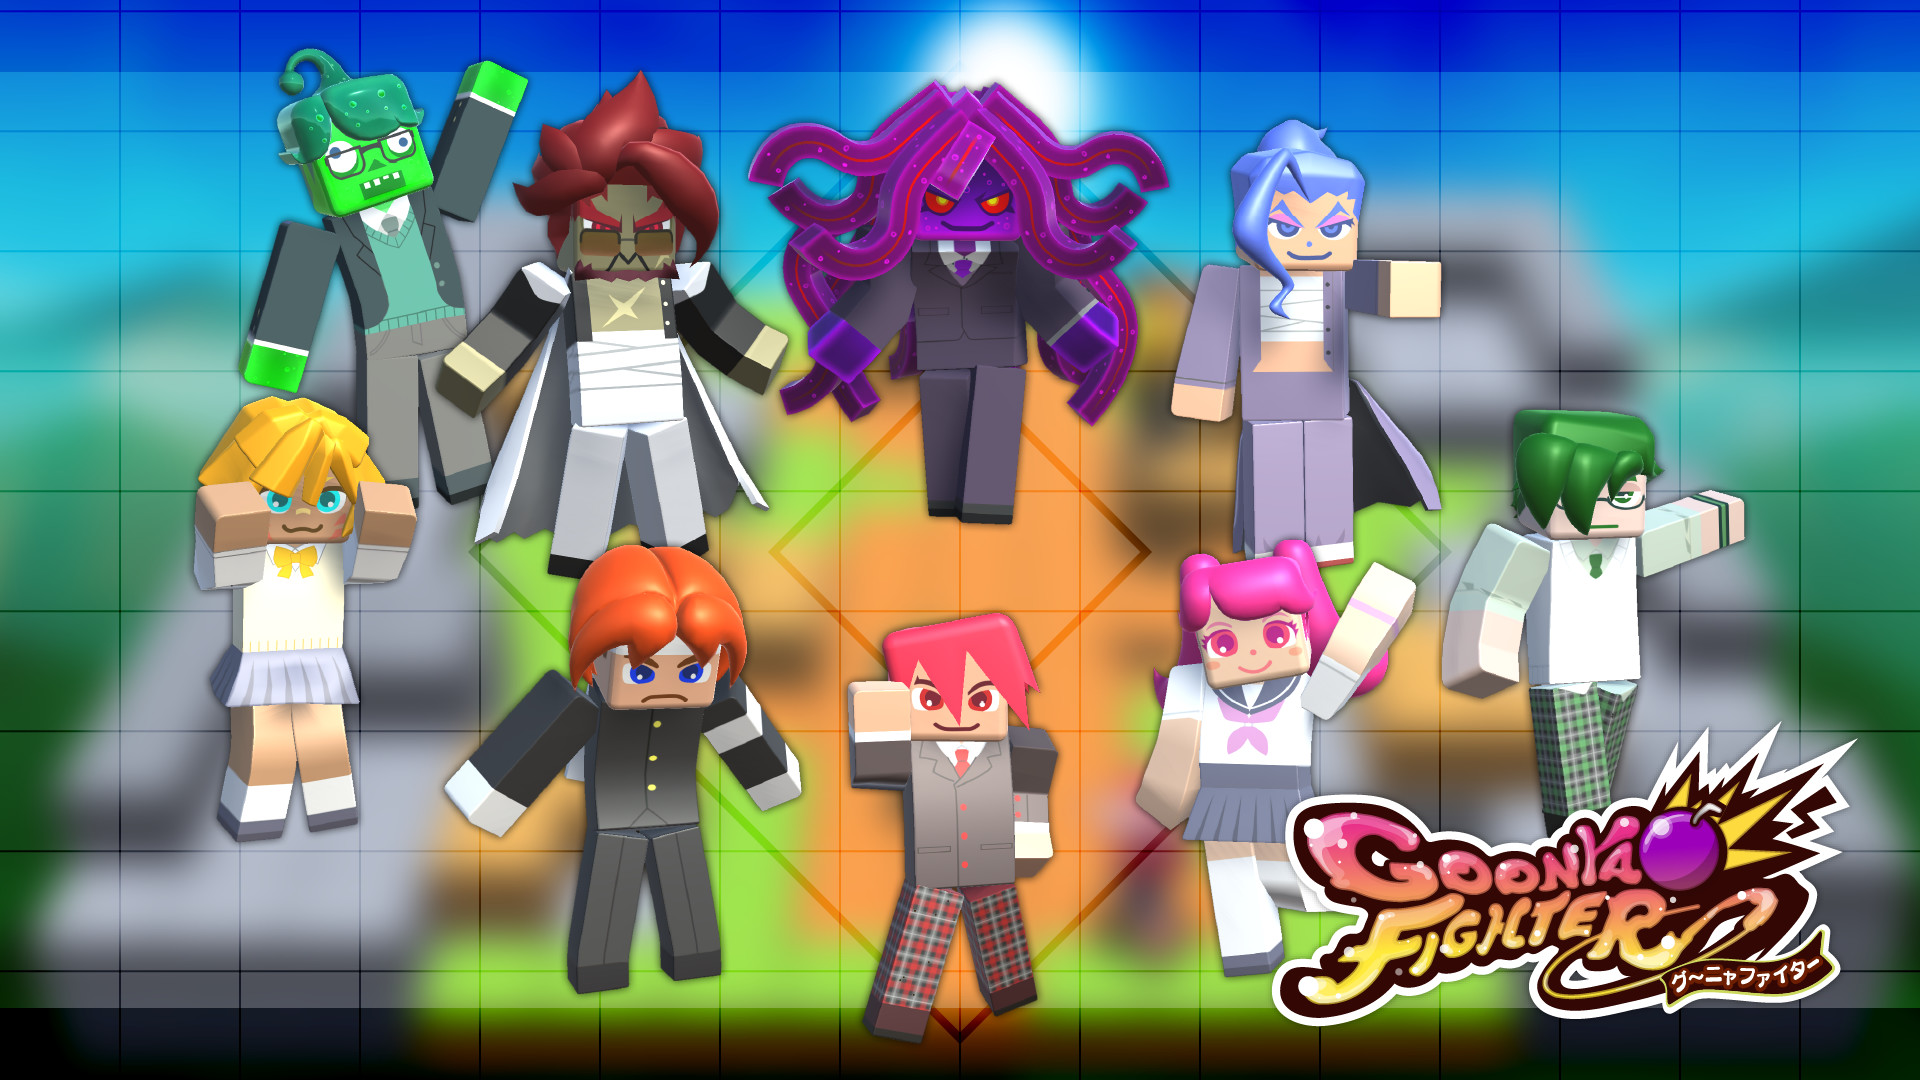 GoonyaFighter - Additional skin: All character skins (College Days ver.) Featured Screenshot #1